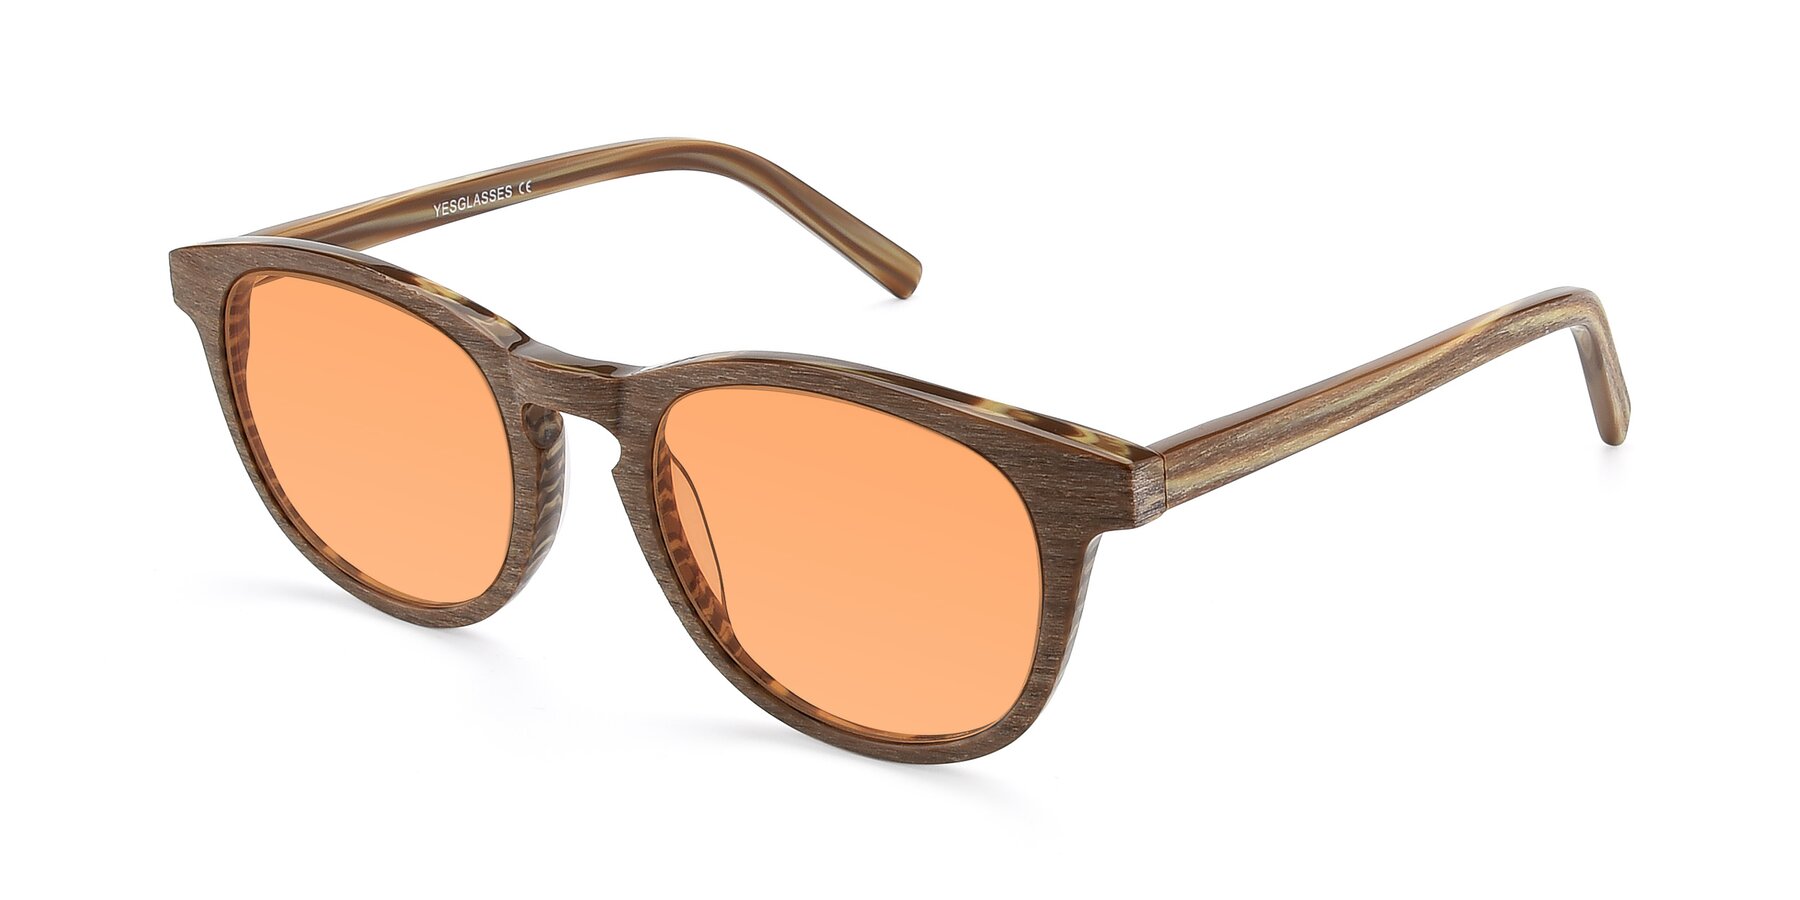 Angle of SR6044 in Brown-Wooden with Medium Orange Tinted Lenses